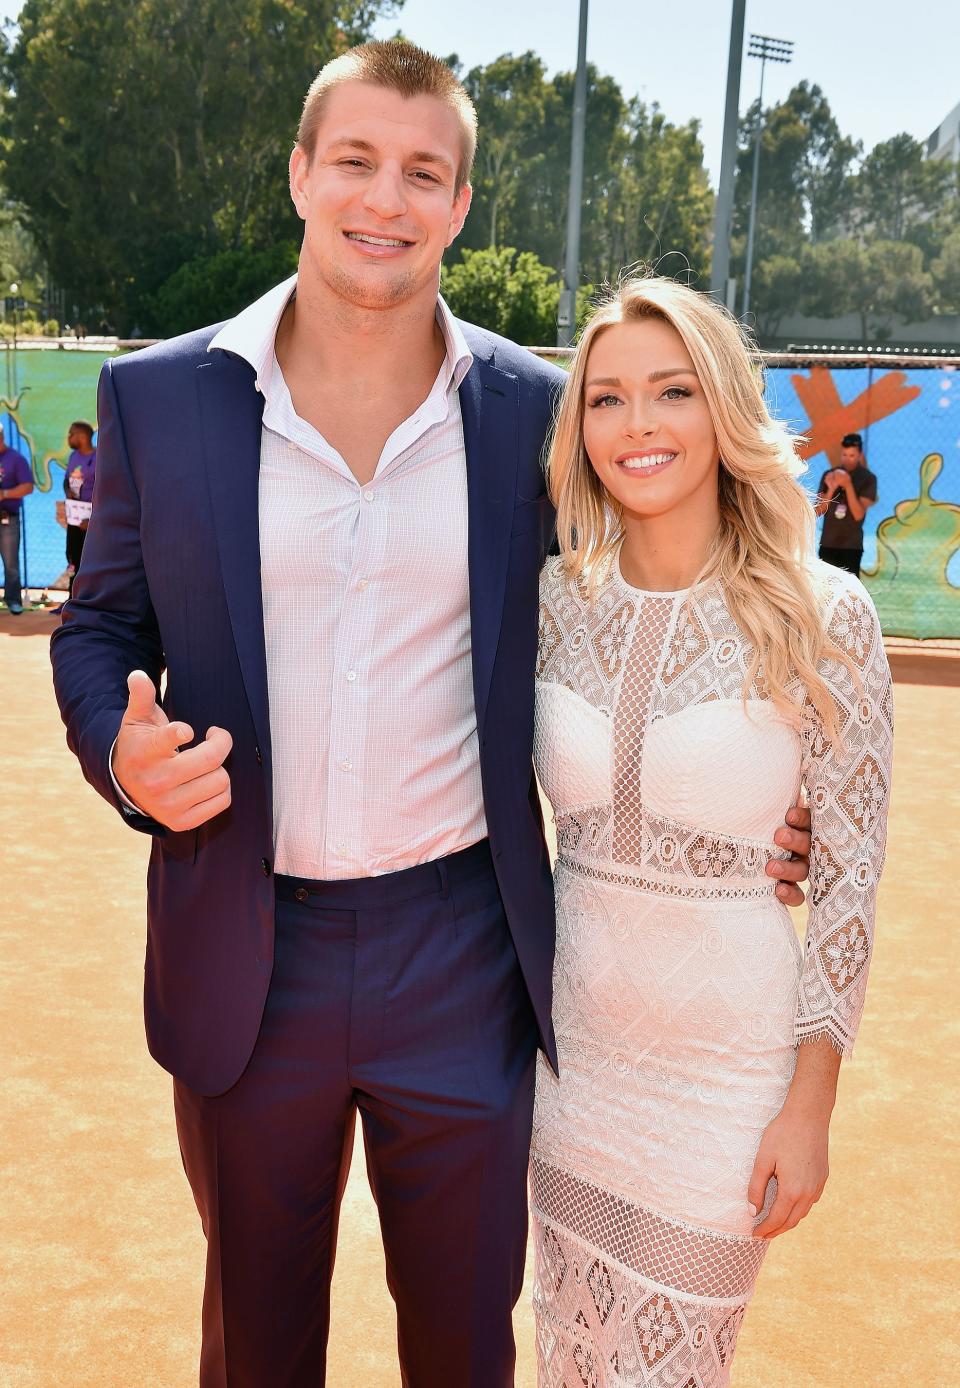 Camille Kostek on Rumors Boyfriend Rob Gronkowski Is Going to Come Out of Retirement